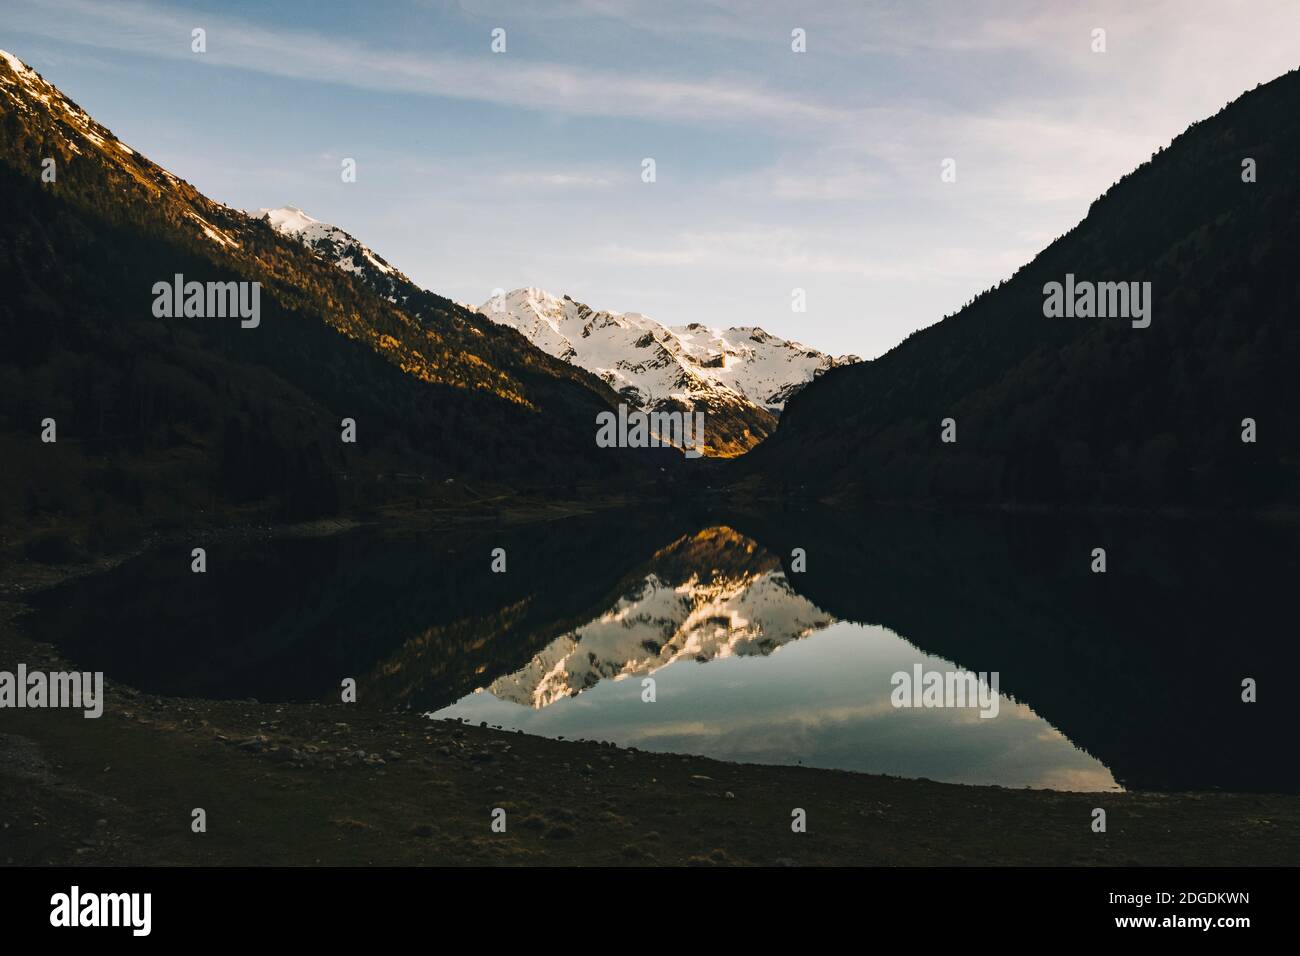 Pyrenees snowcapped mountains peaks reflected in the Lac de Fabrges, Laruns, France Stock Photo